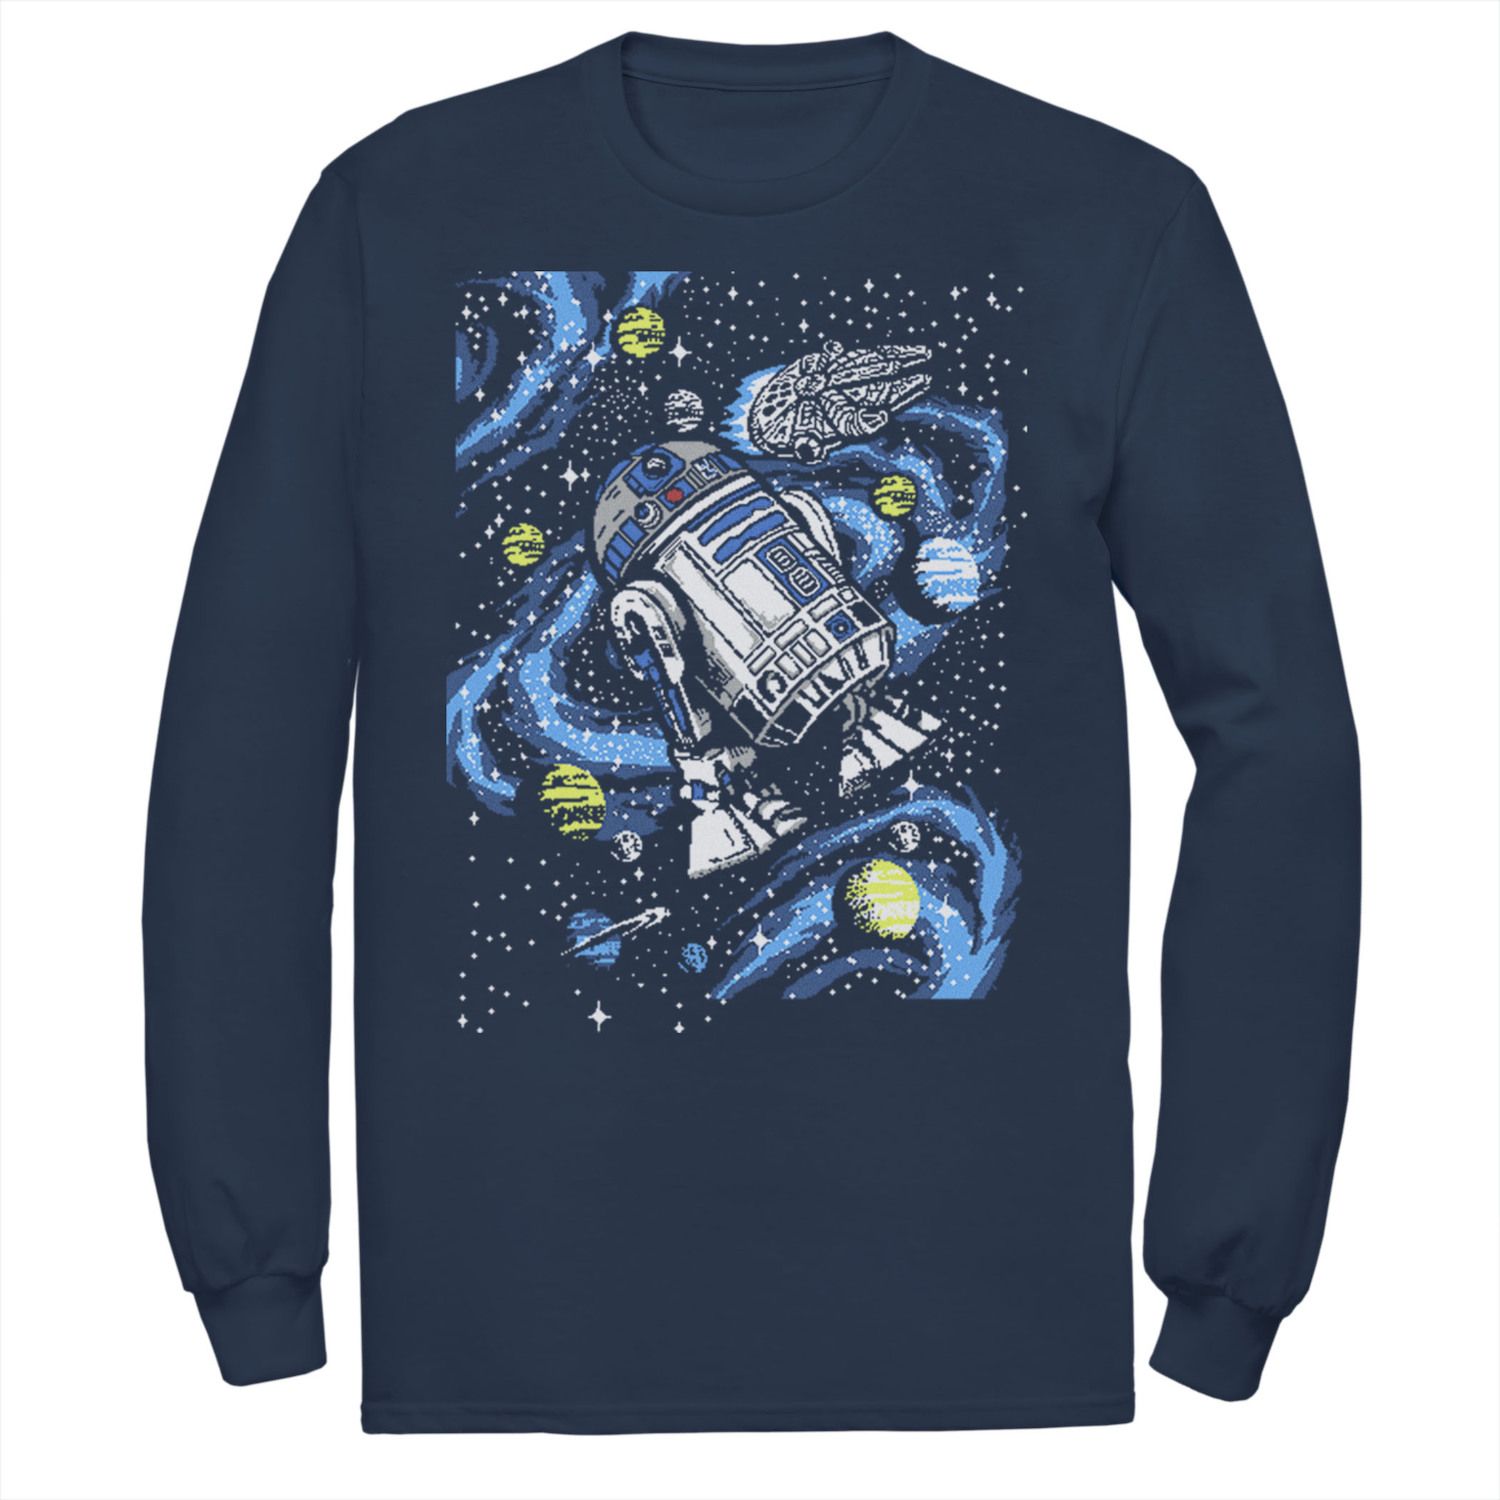 Image for Licensed Character Men's Star Wars R2 Space Graphic Tee at Kohl's.